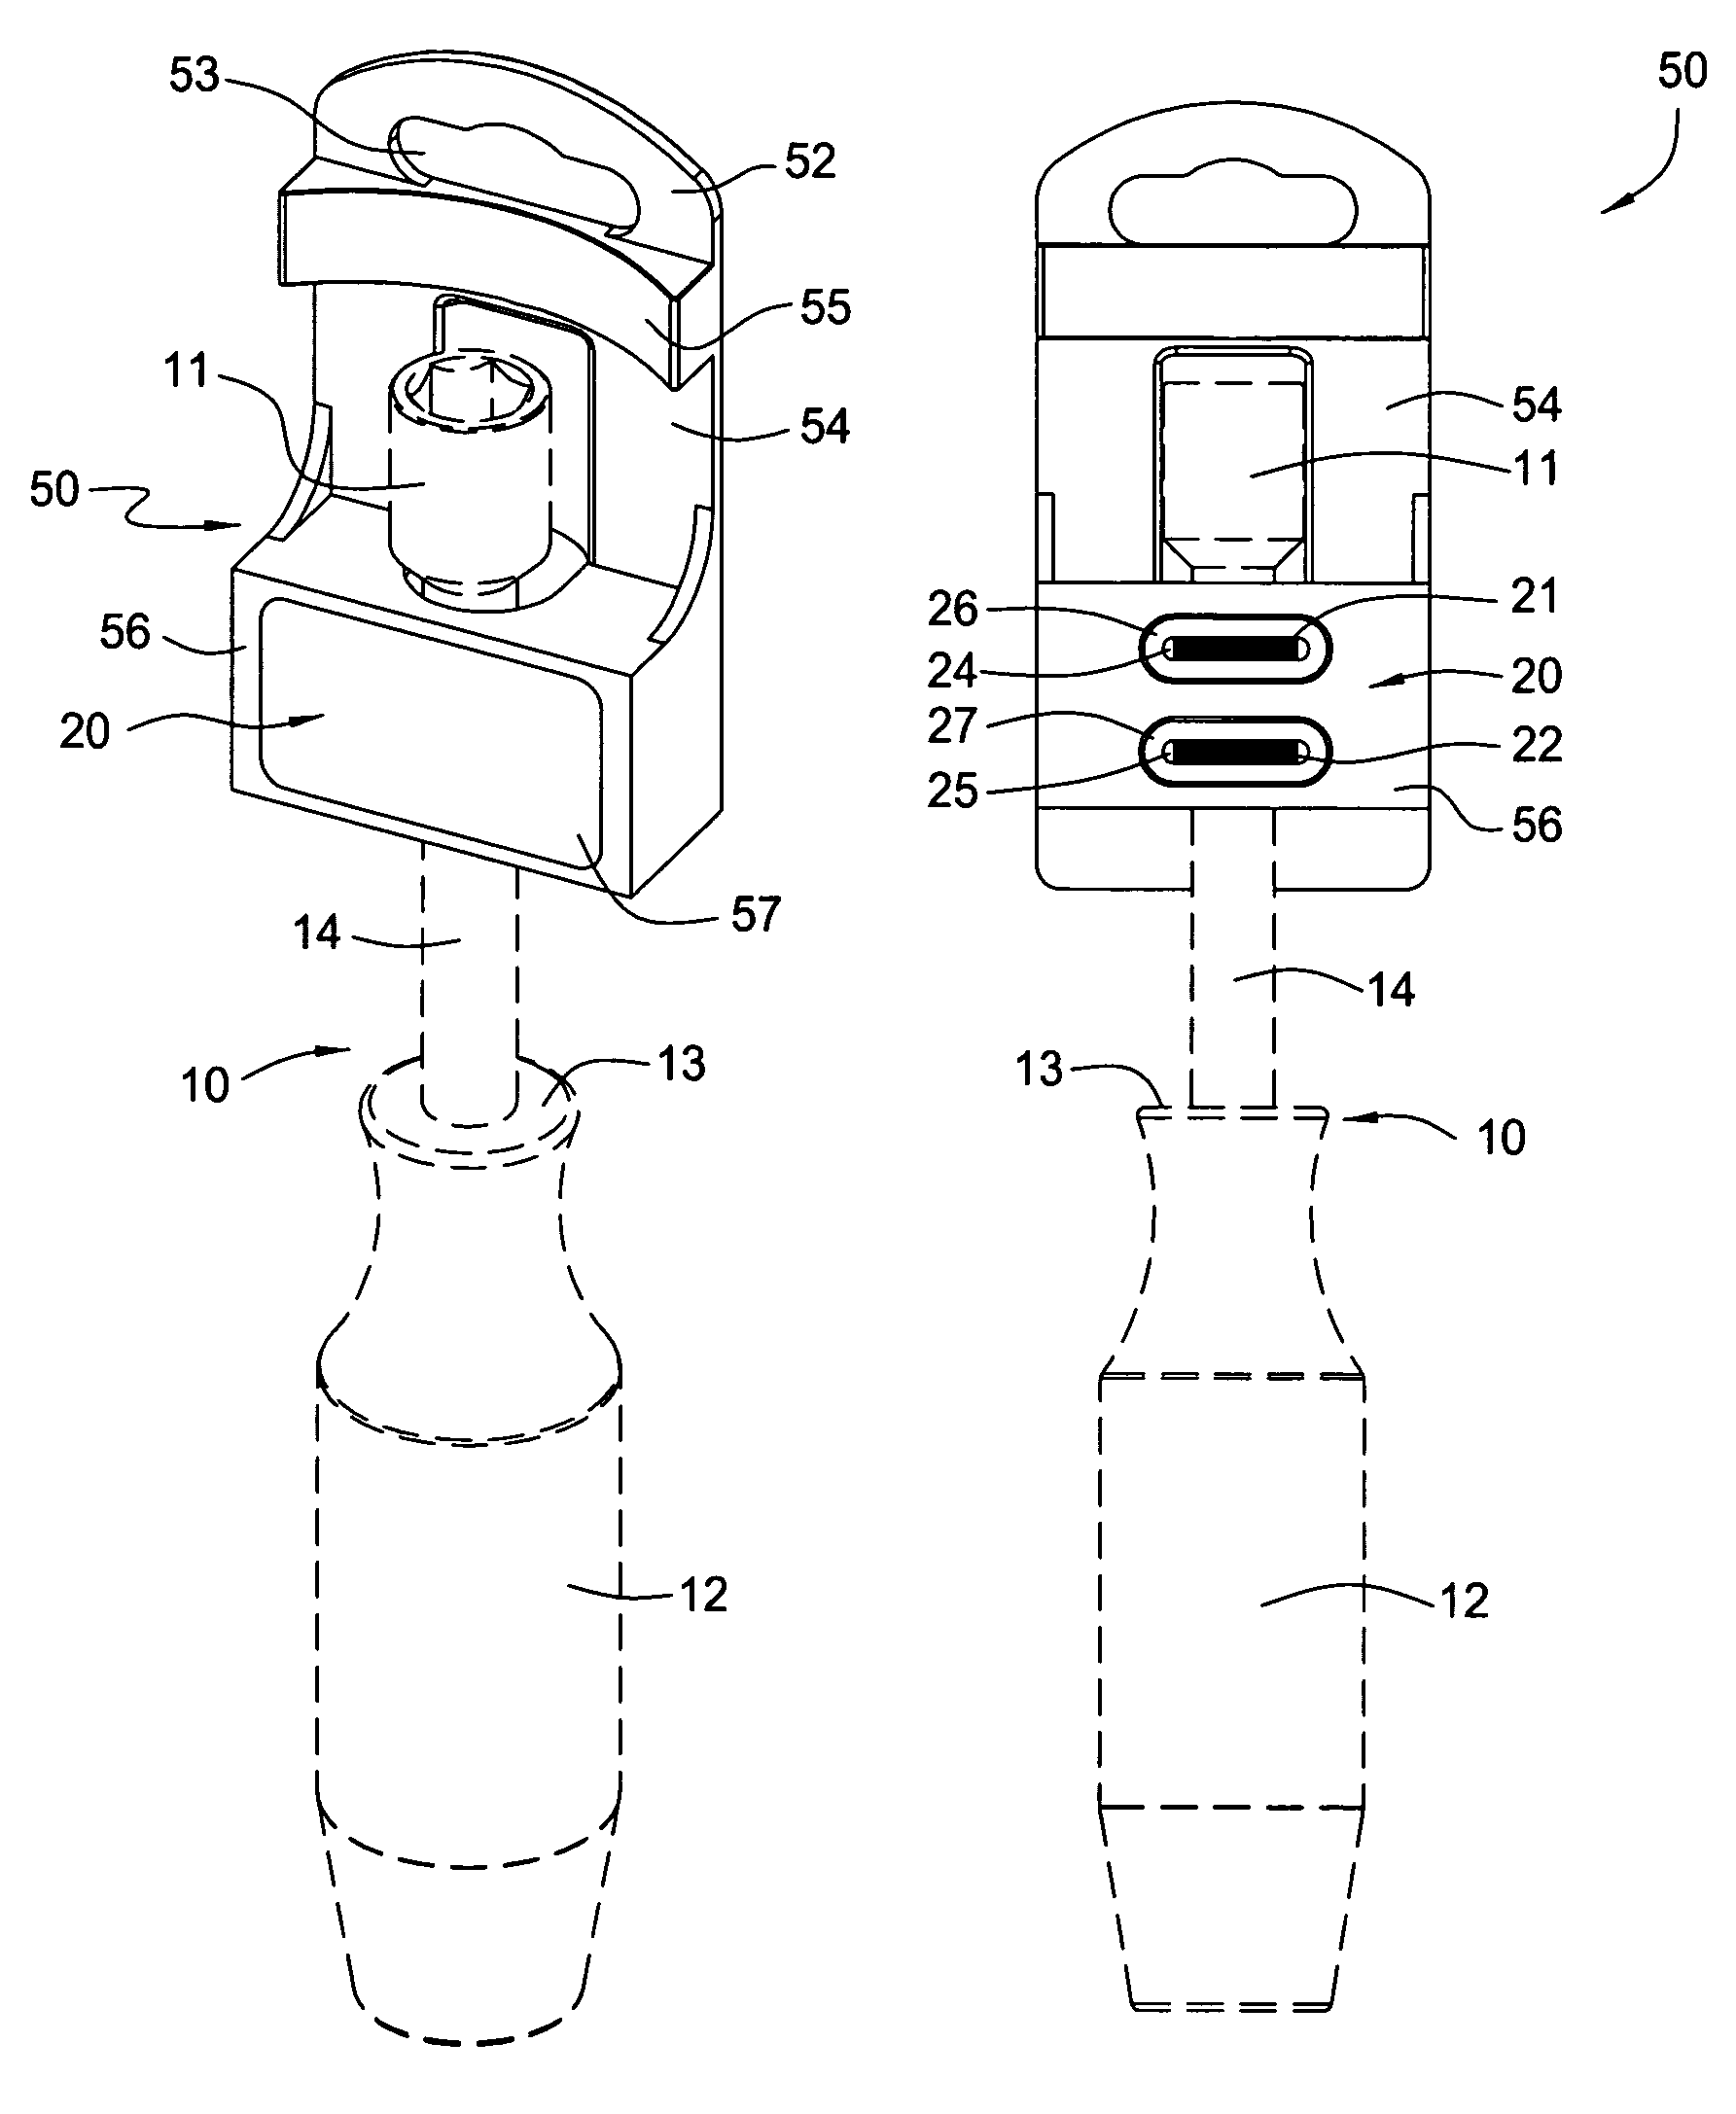 Tool securing mechanism for hangtag assembly